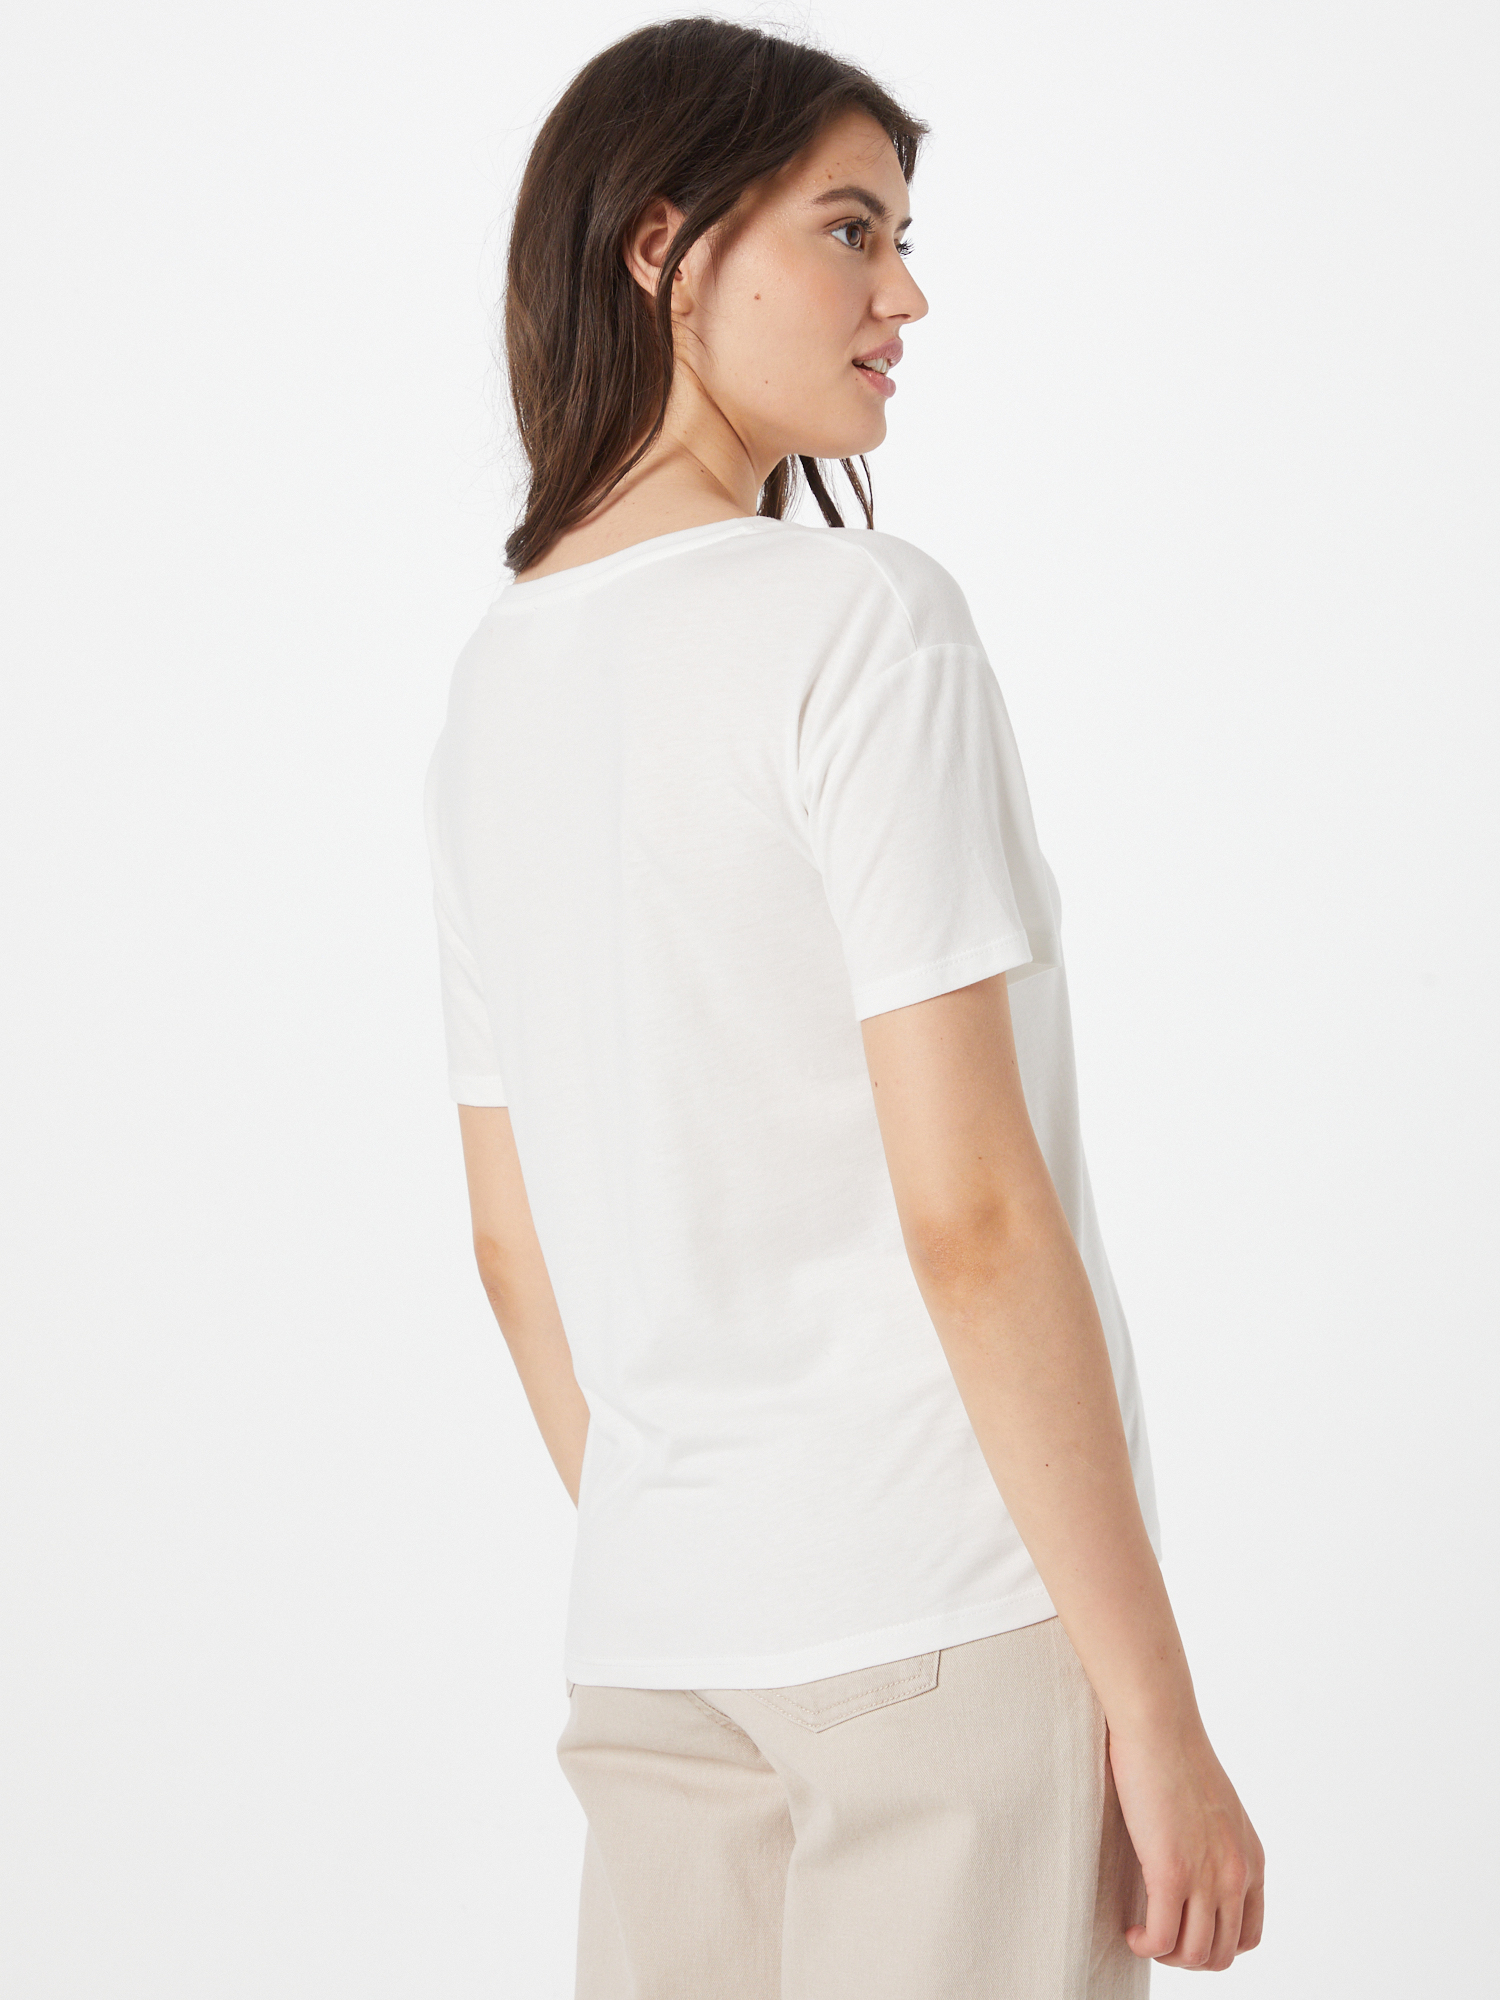 Maison 123 T-Shirt INDRA in Creme, Hellbeige 